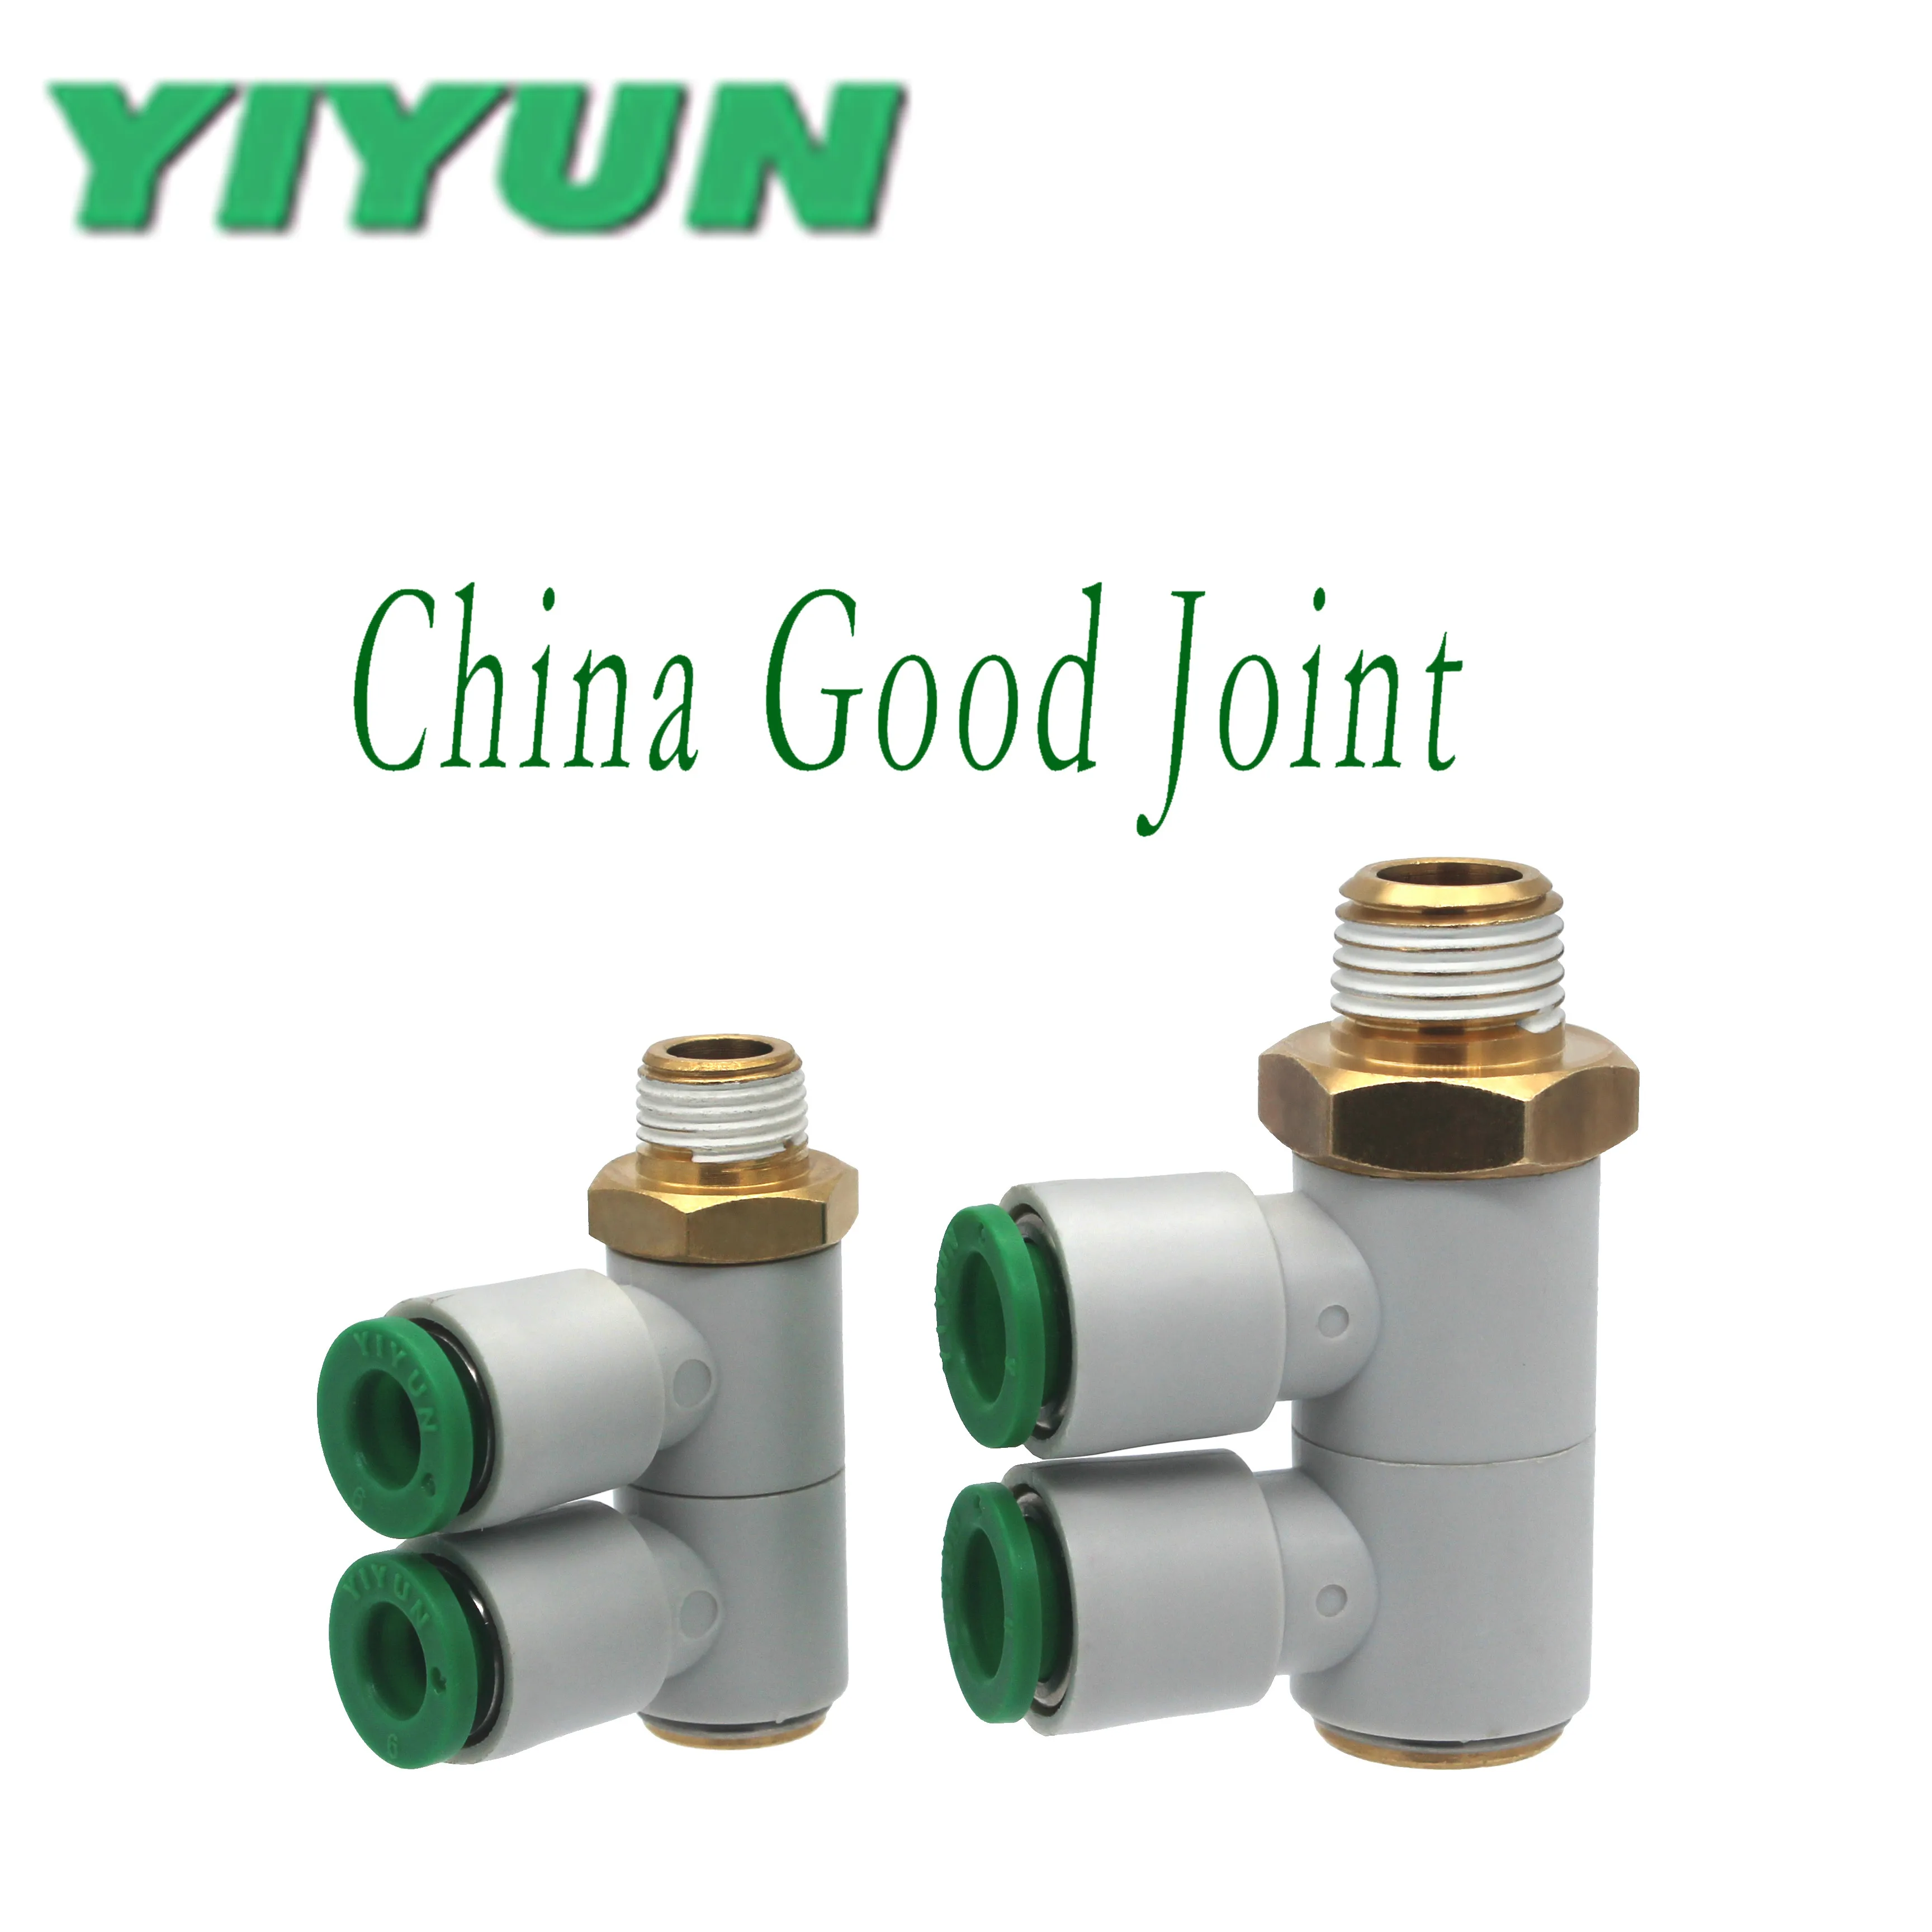 

KQ2VD10-02S,03S,04S KQ2VD12-02S,03S,04S YIYUN Pneumatic Air Fittings Double universal elbow Joint Connector KQ2 KQ2VD Series